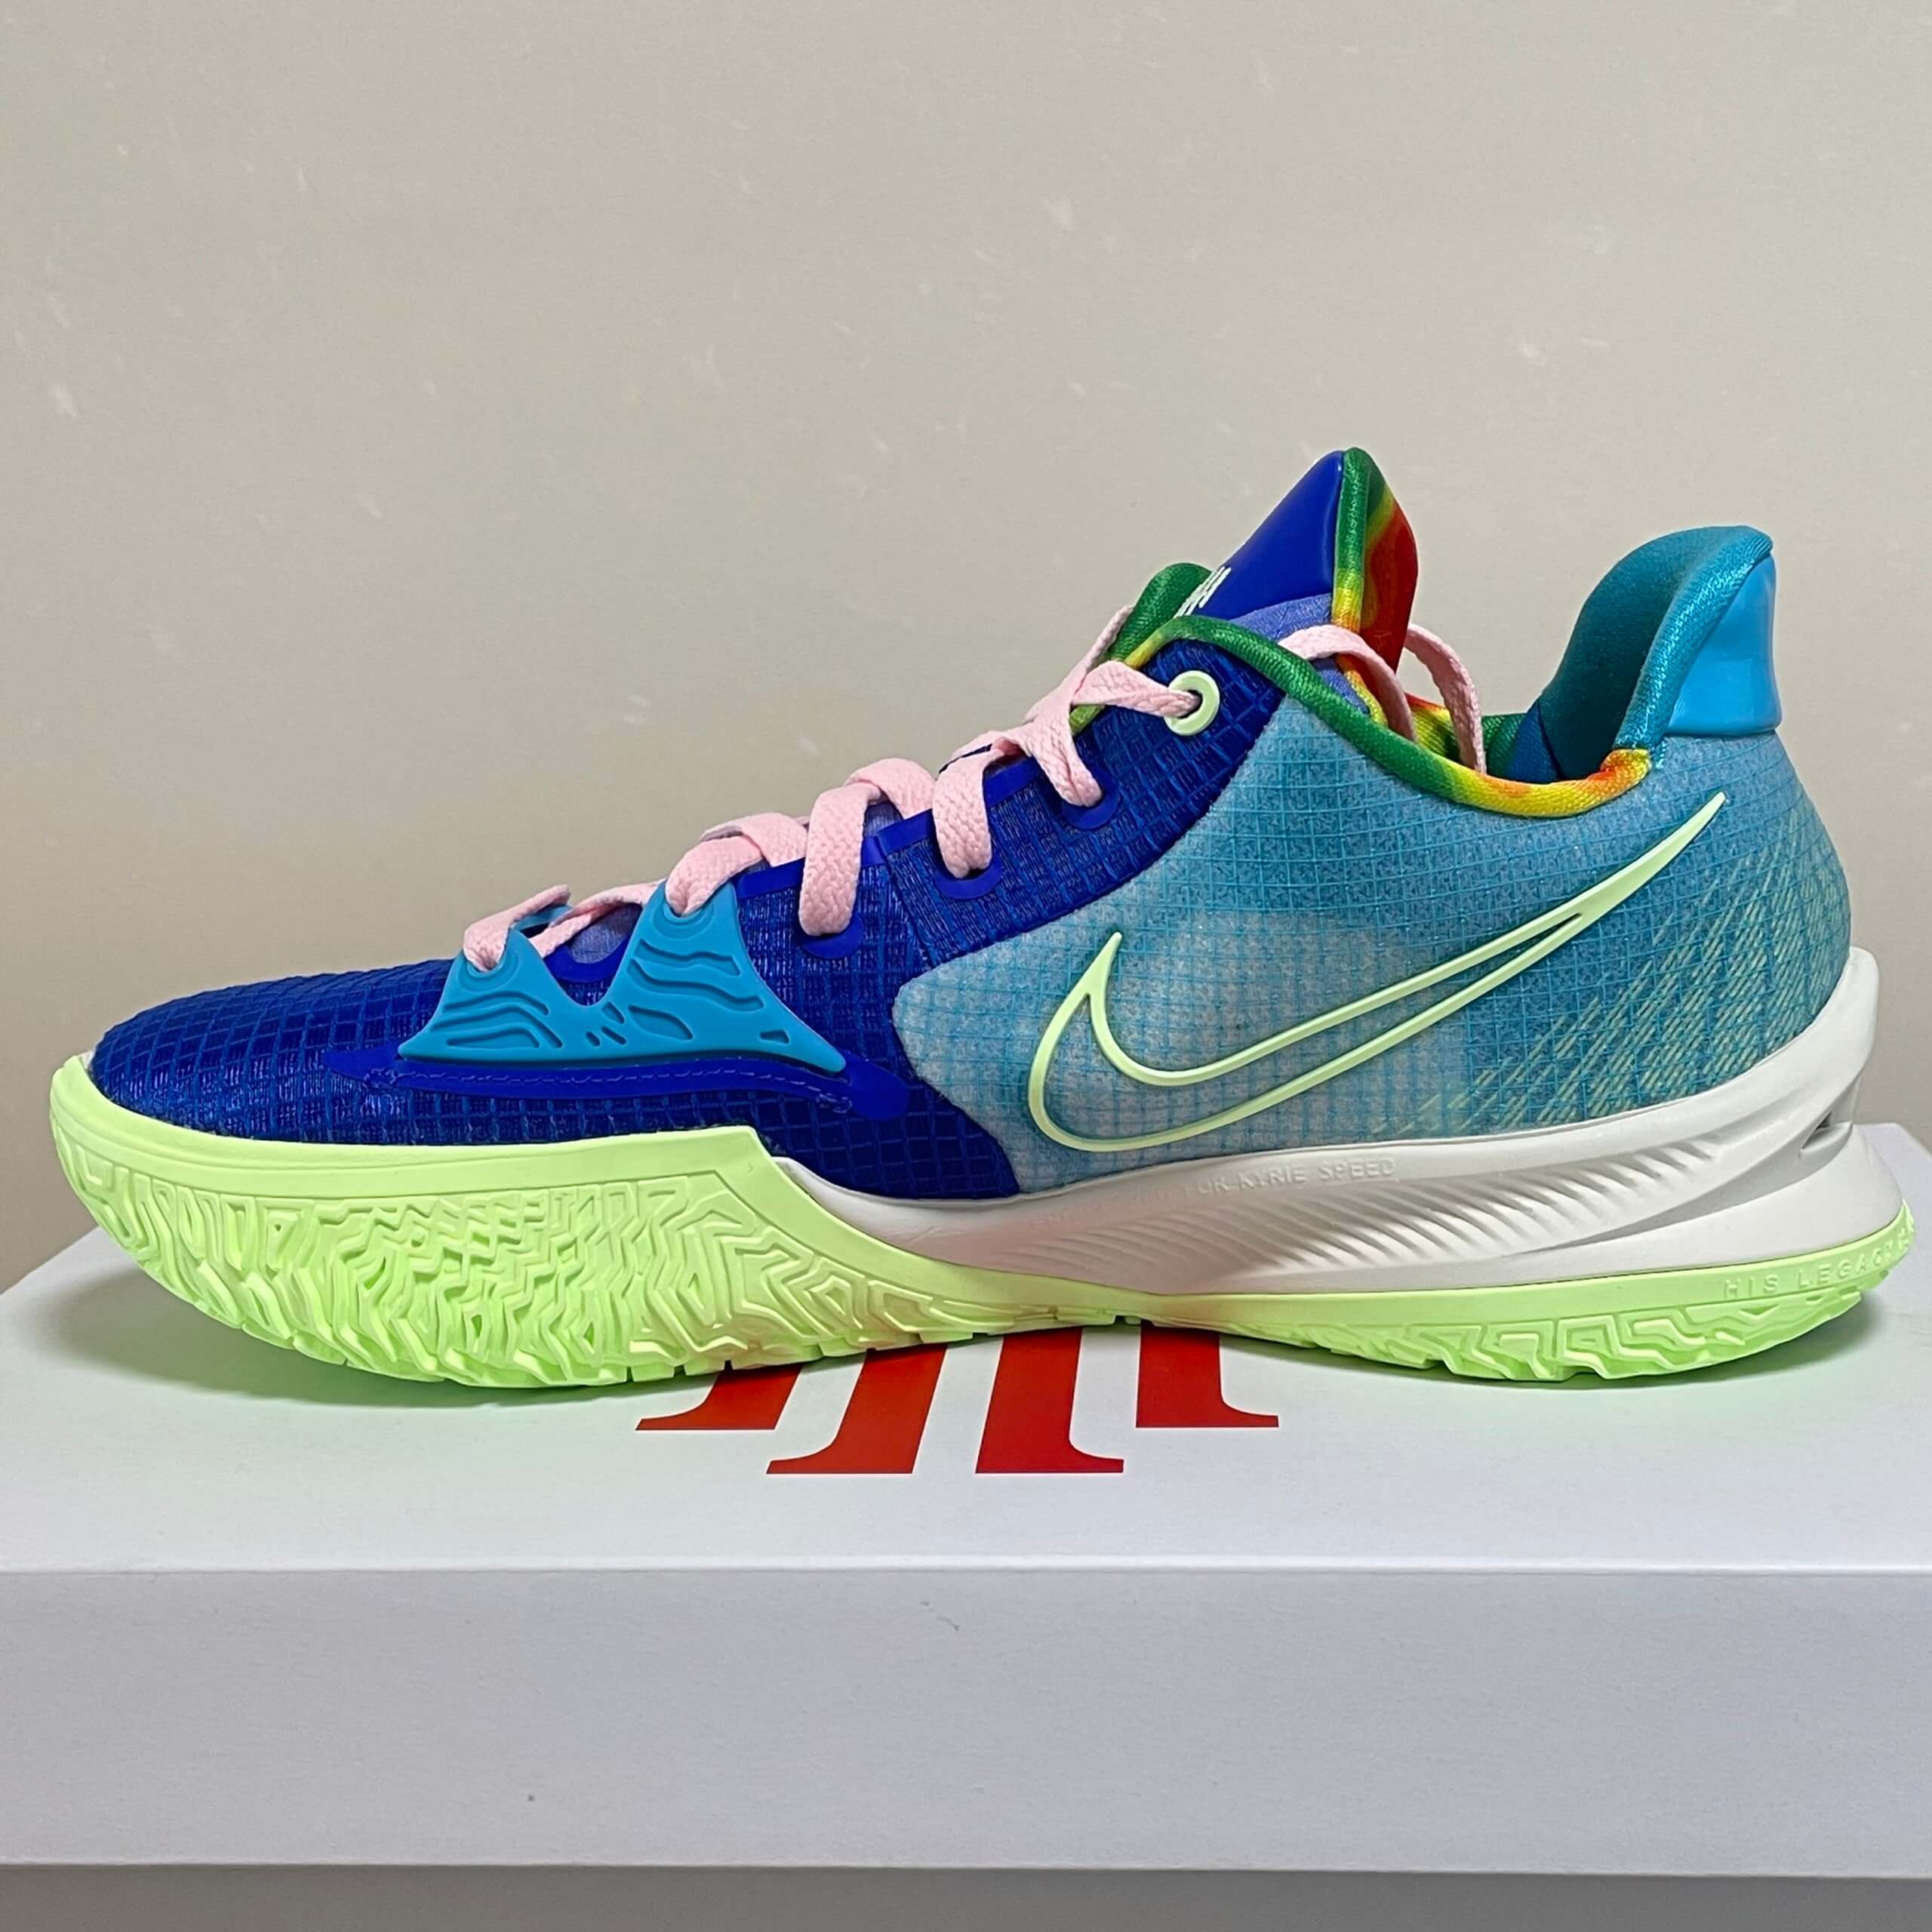 Nike Kyrie Low 4 Performance Review - ASTERKICKS